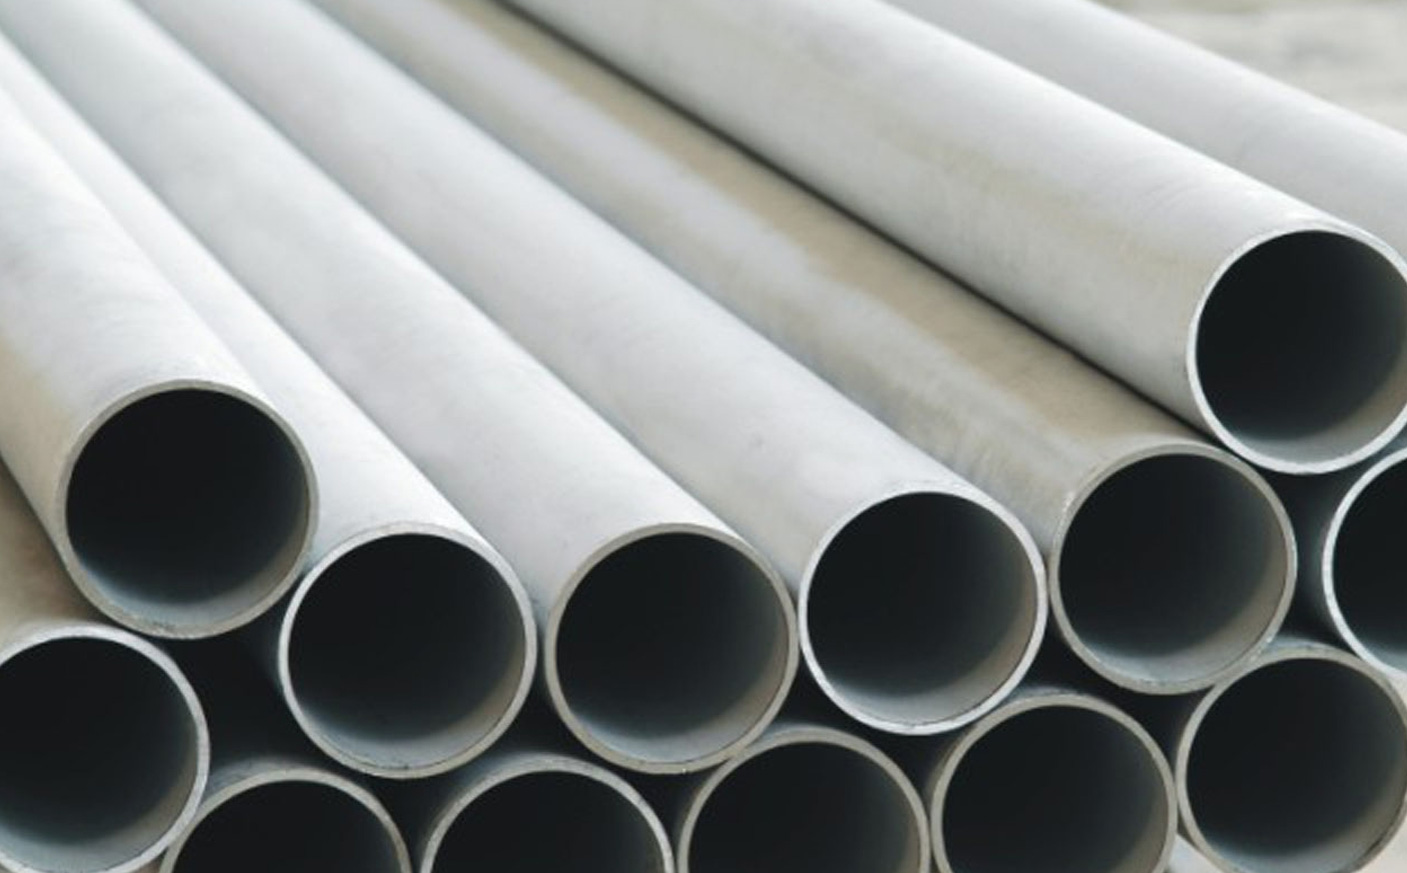 Duplex Stainless Steel Pipe Market Analysis And Precise Outlook 2019 To 2025